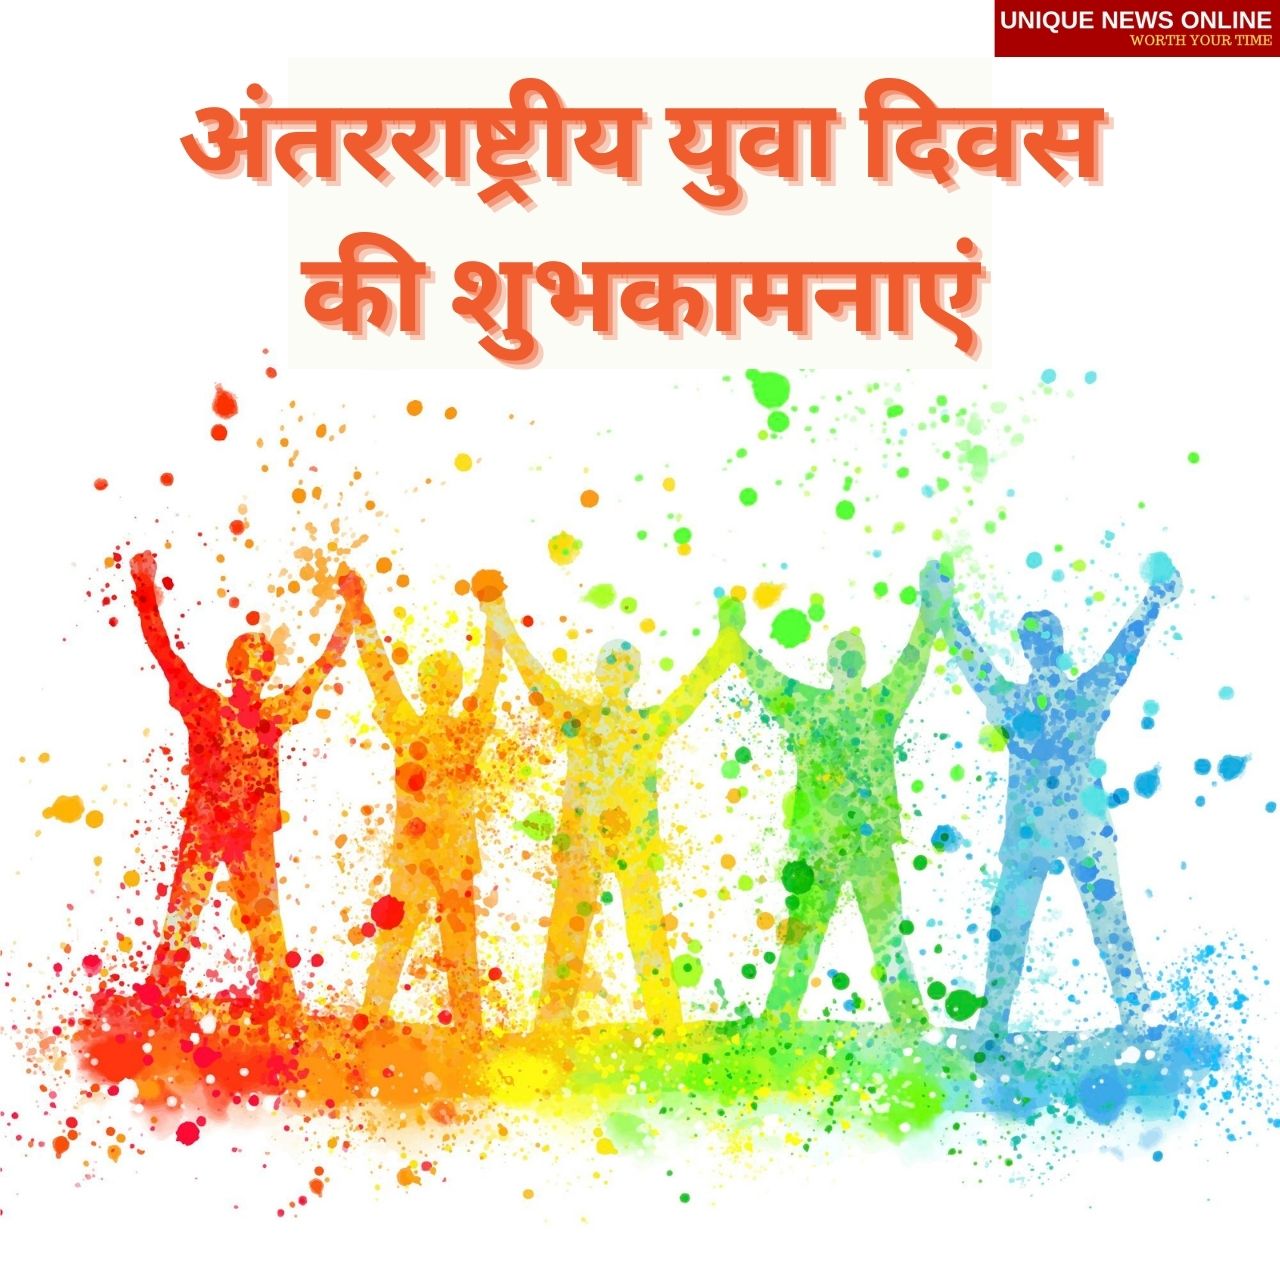 International Youth Day 2021 Hindi Wishes, Quotes, Poster, Messages, Greetings, Status, and HD Images to Share